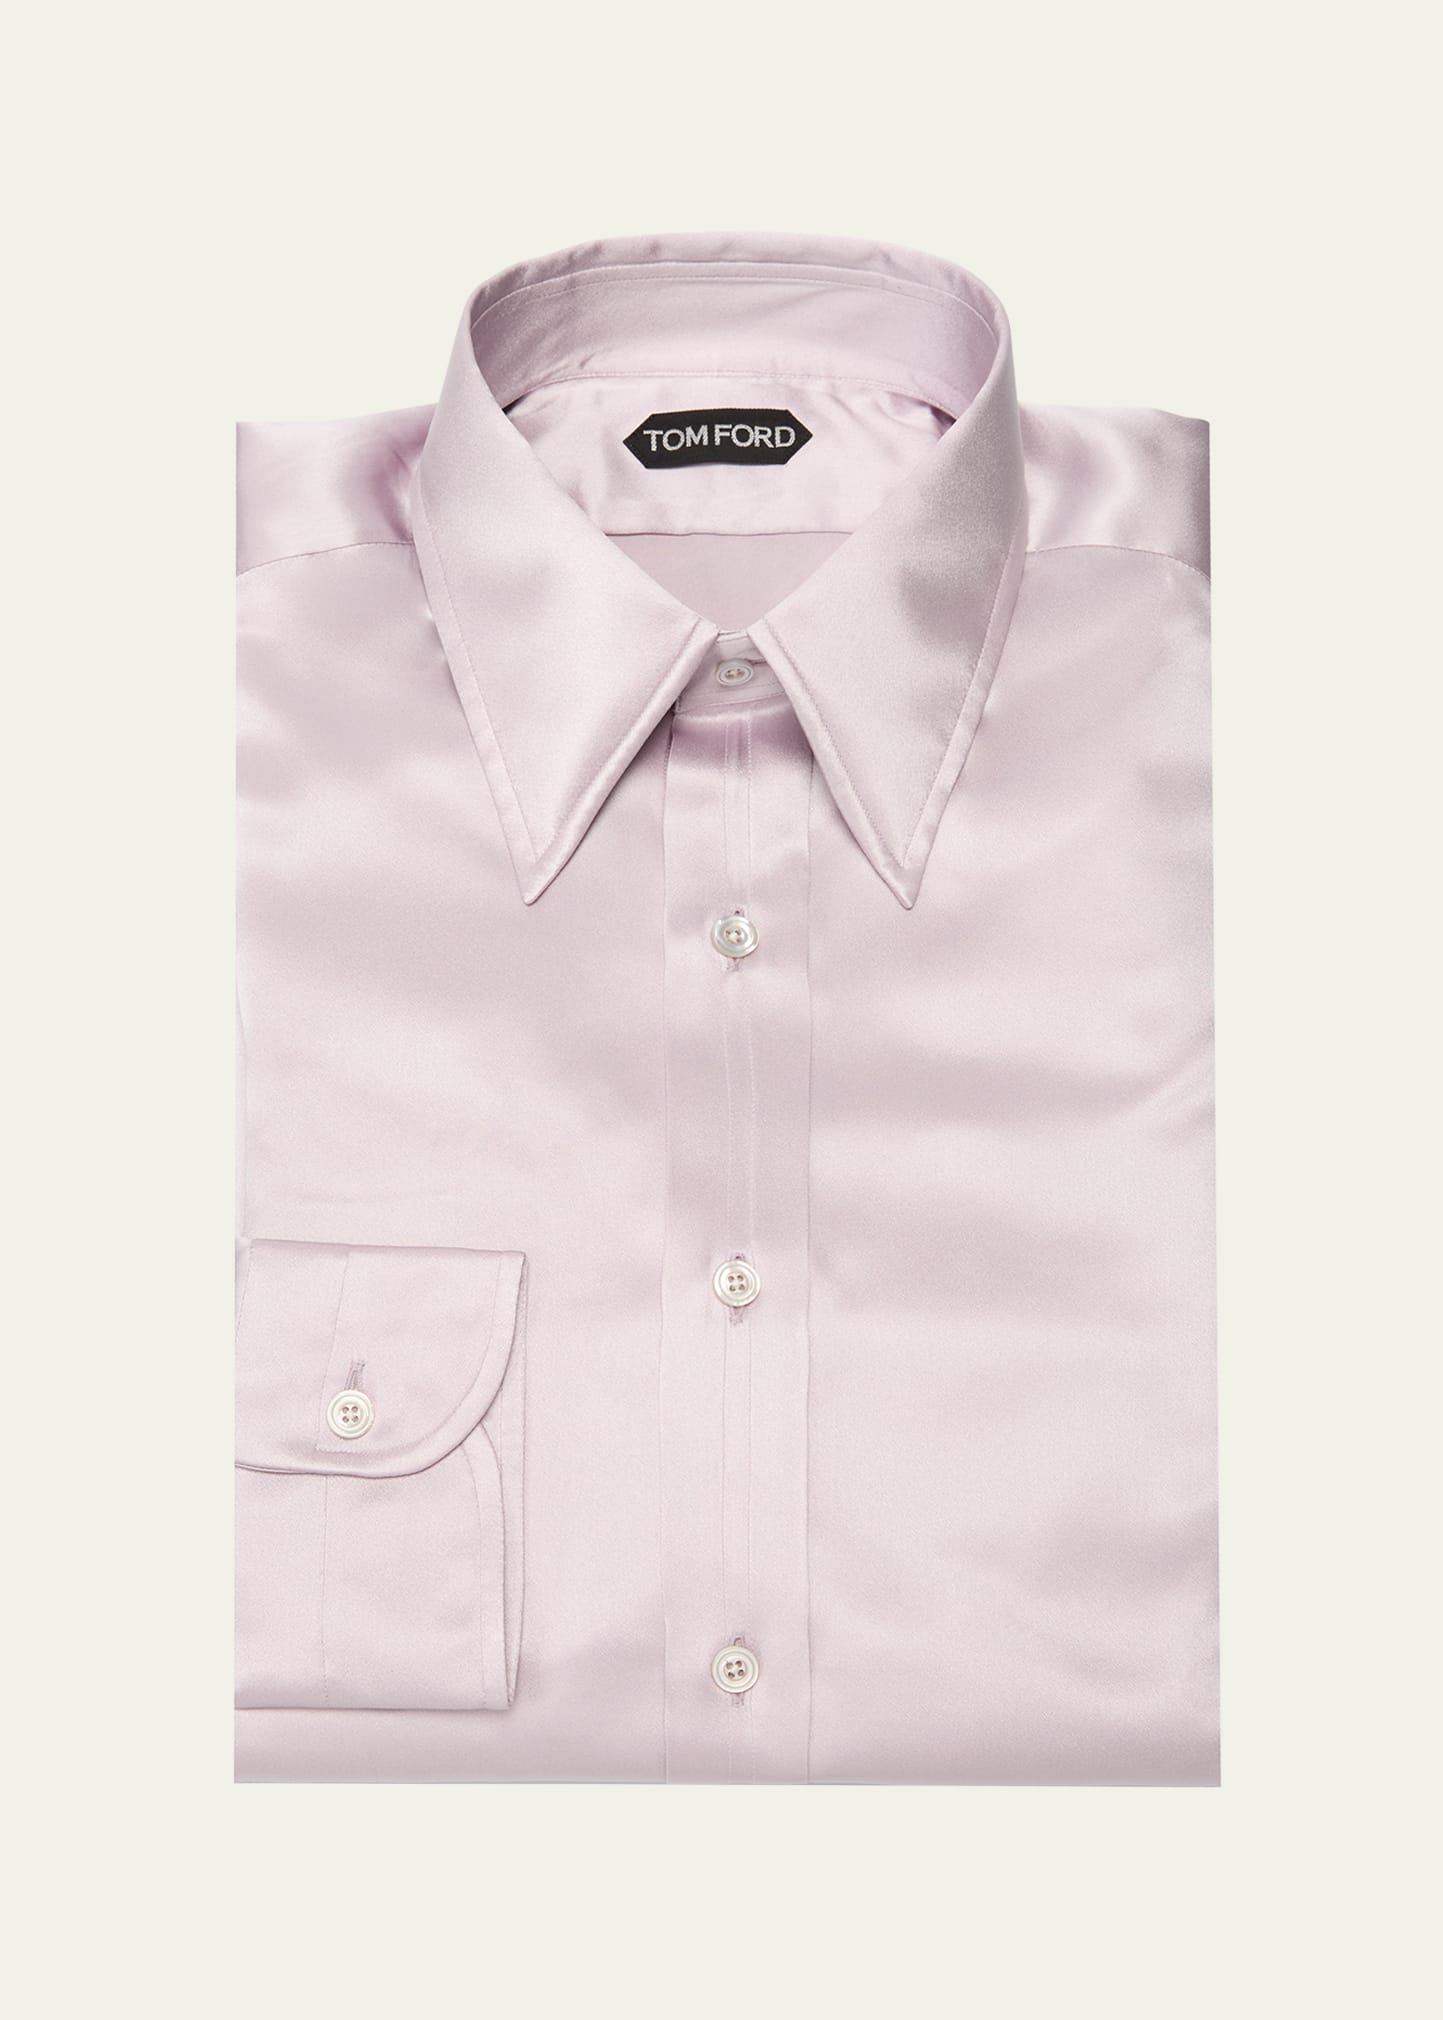 Tom Ford Men's Silk Charmeuse Slim Fit Dress Shirt In Dusty Lilac